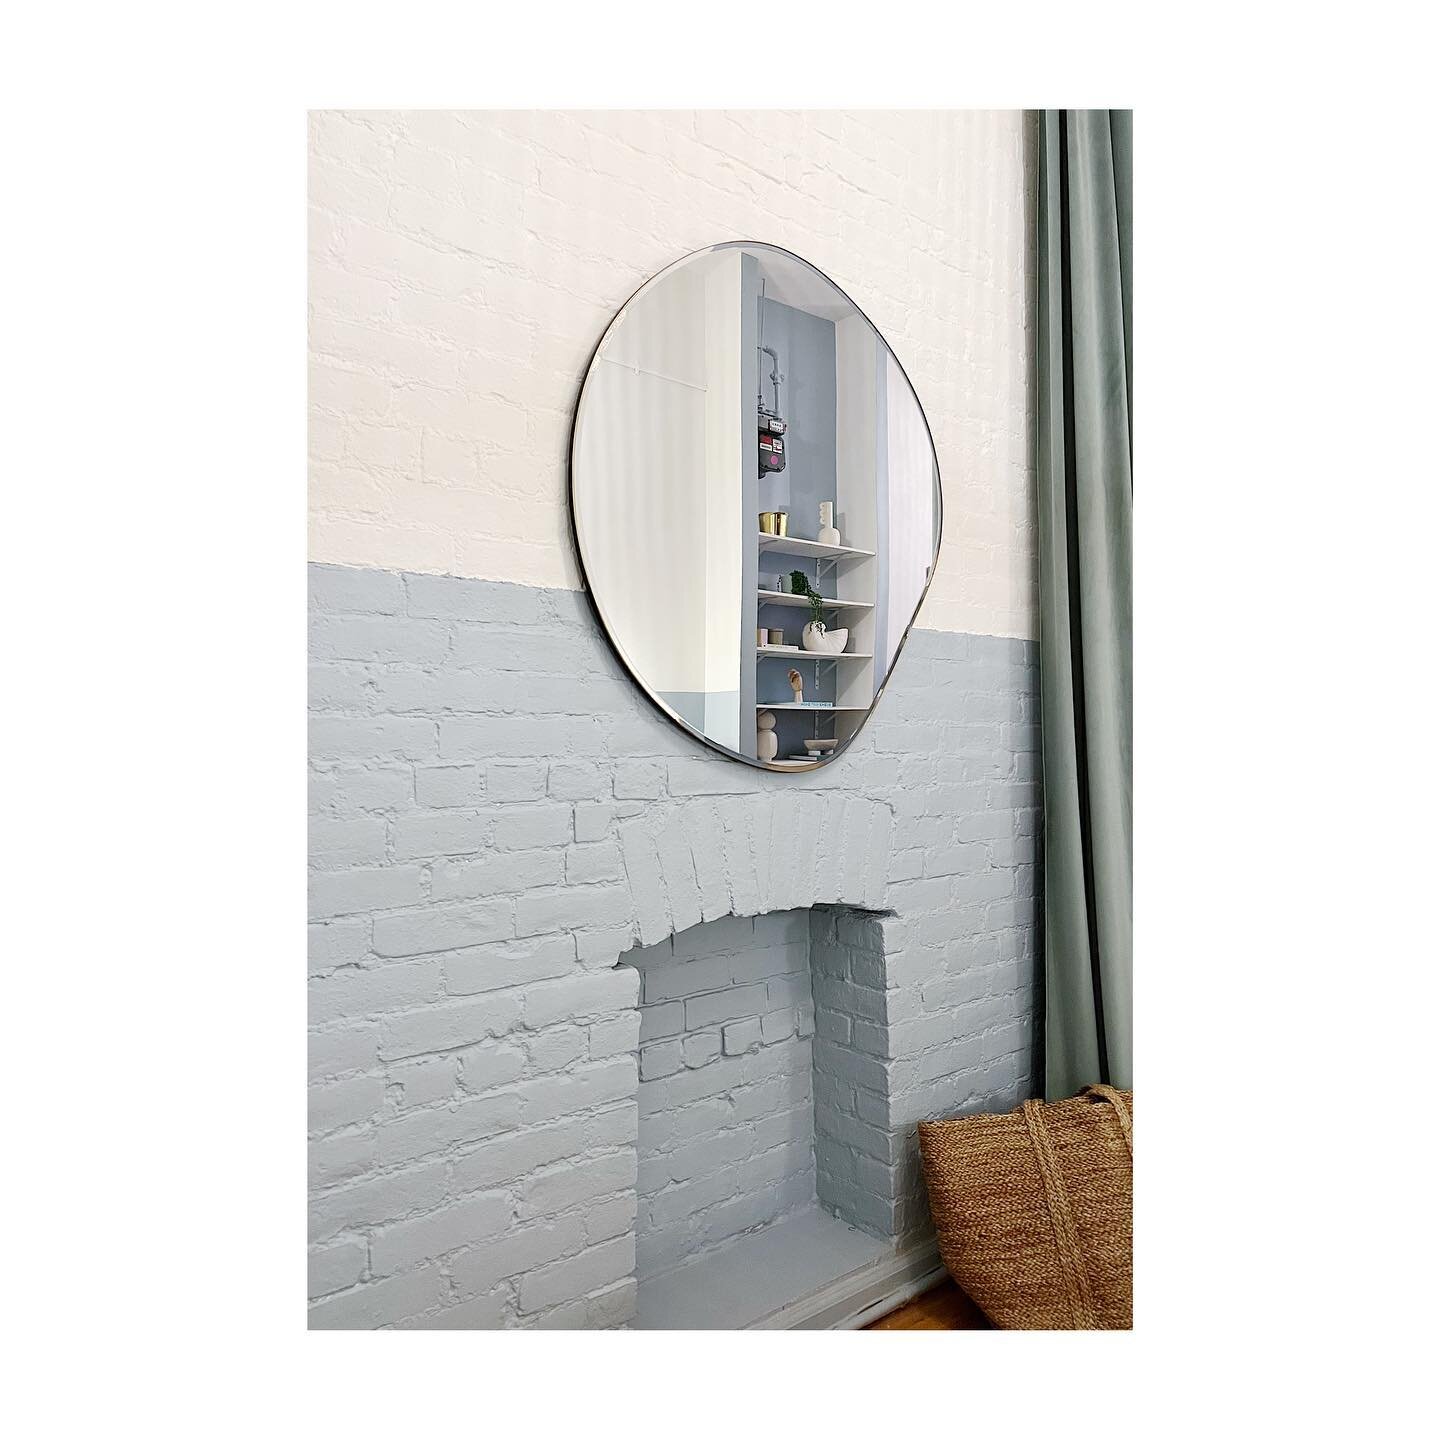 Because we love an asymmetric mirror moment &mdash; no one is perfect, so why should our mirror be?

@fermliving @backdrop @franny_hospitality @fenixliving #designapartments #airbnb #airbnbsuperhost #shorttermrental